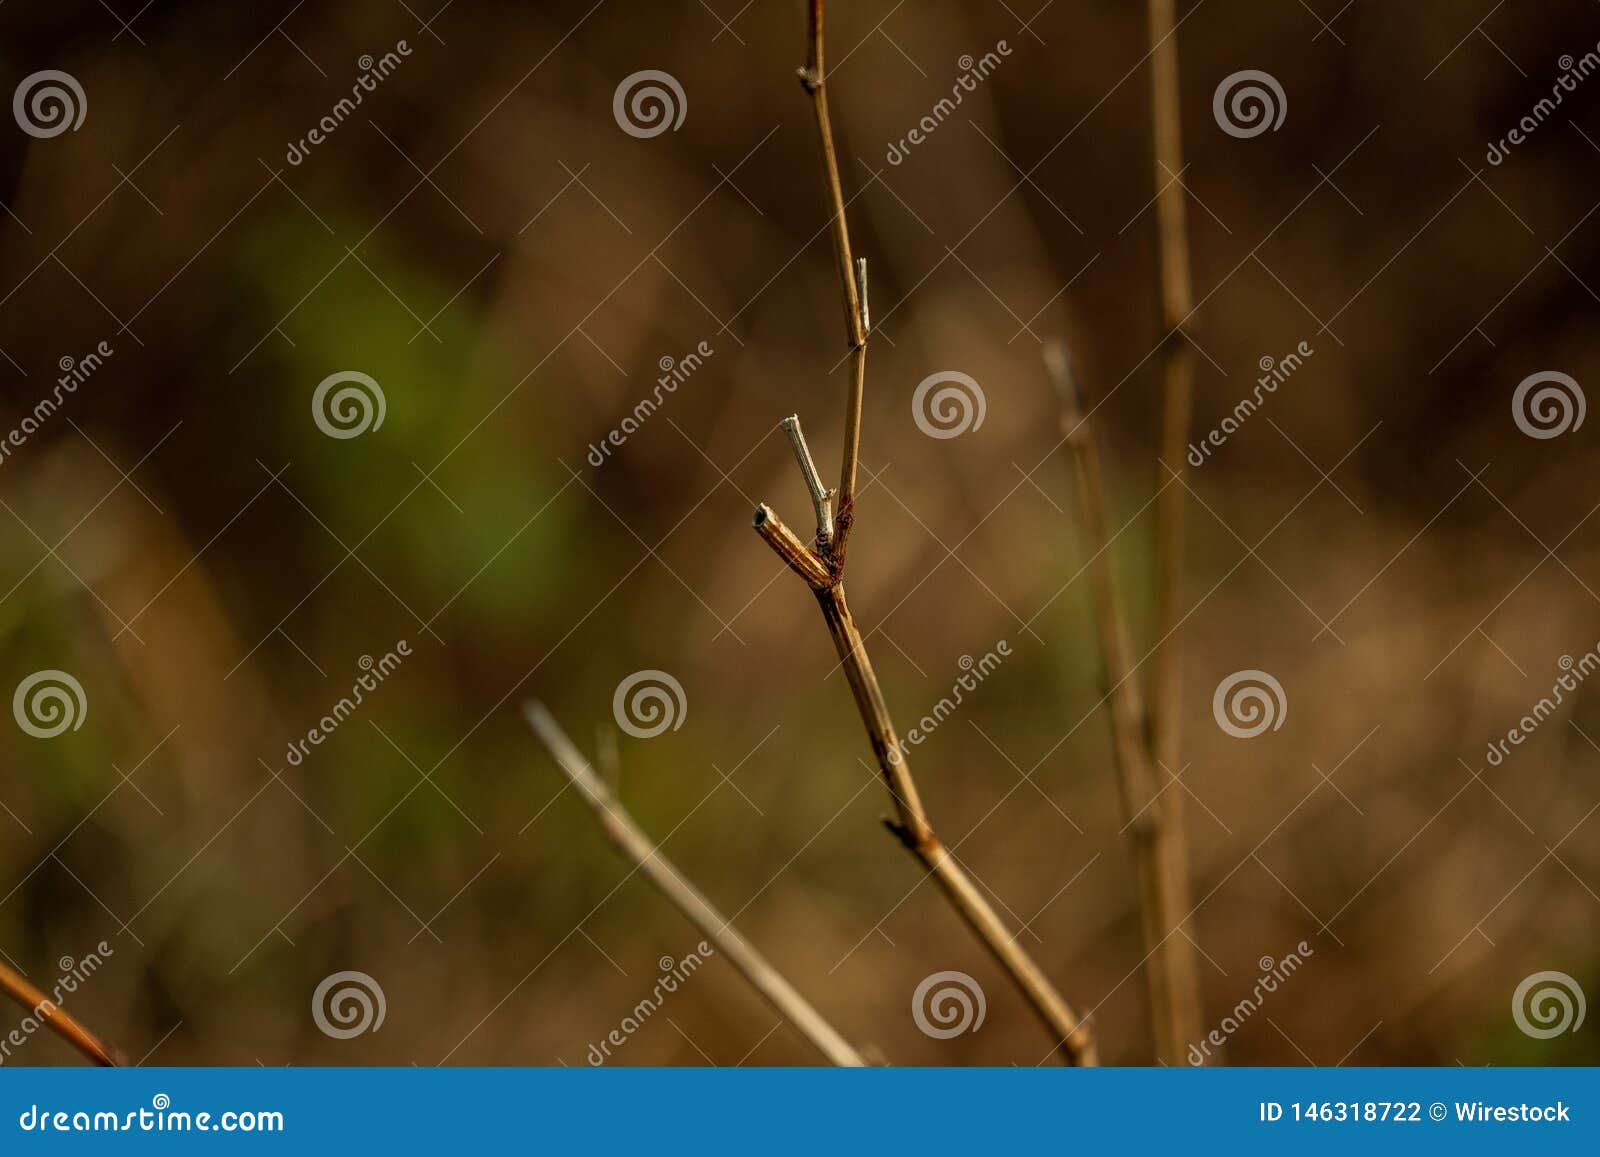 Thin Plant Branches with Natural Backgrounds Stock Illustration